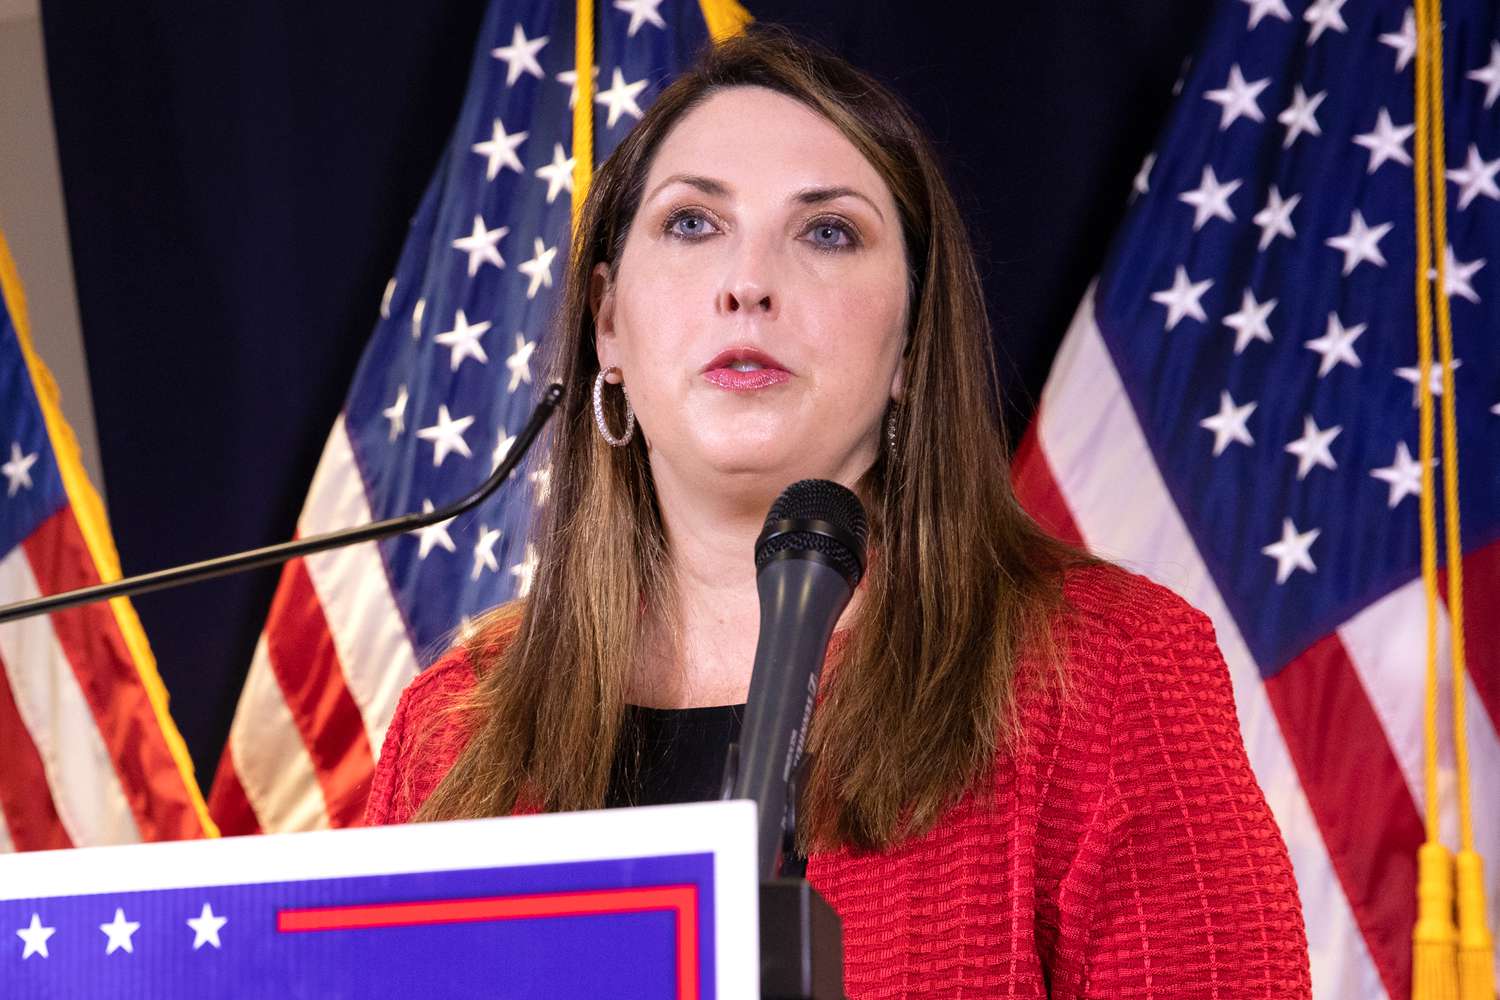 ronna mcdaniel agrees to resign as rnc chair amid pressure from the trumps